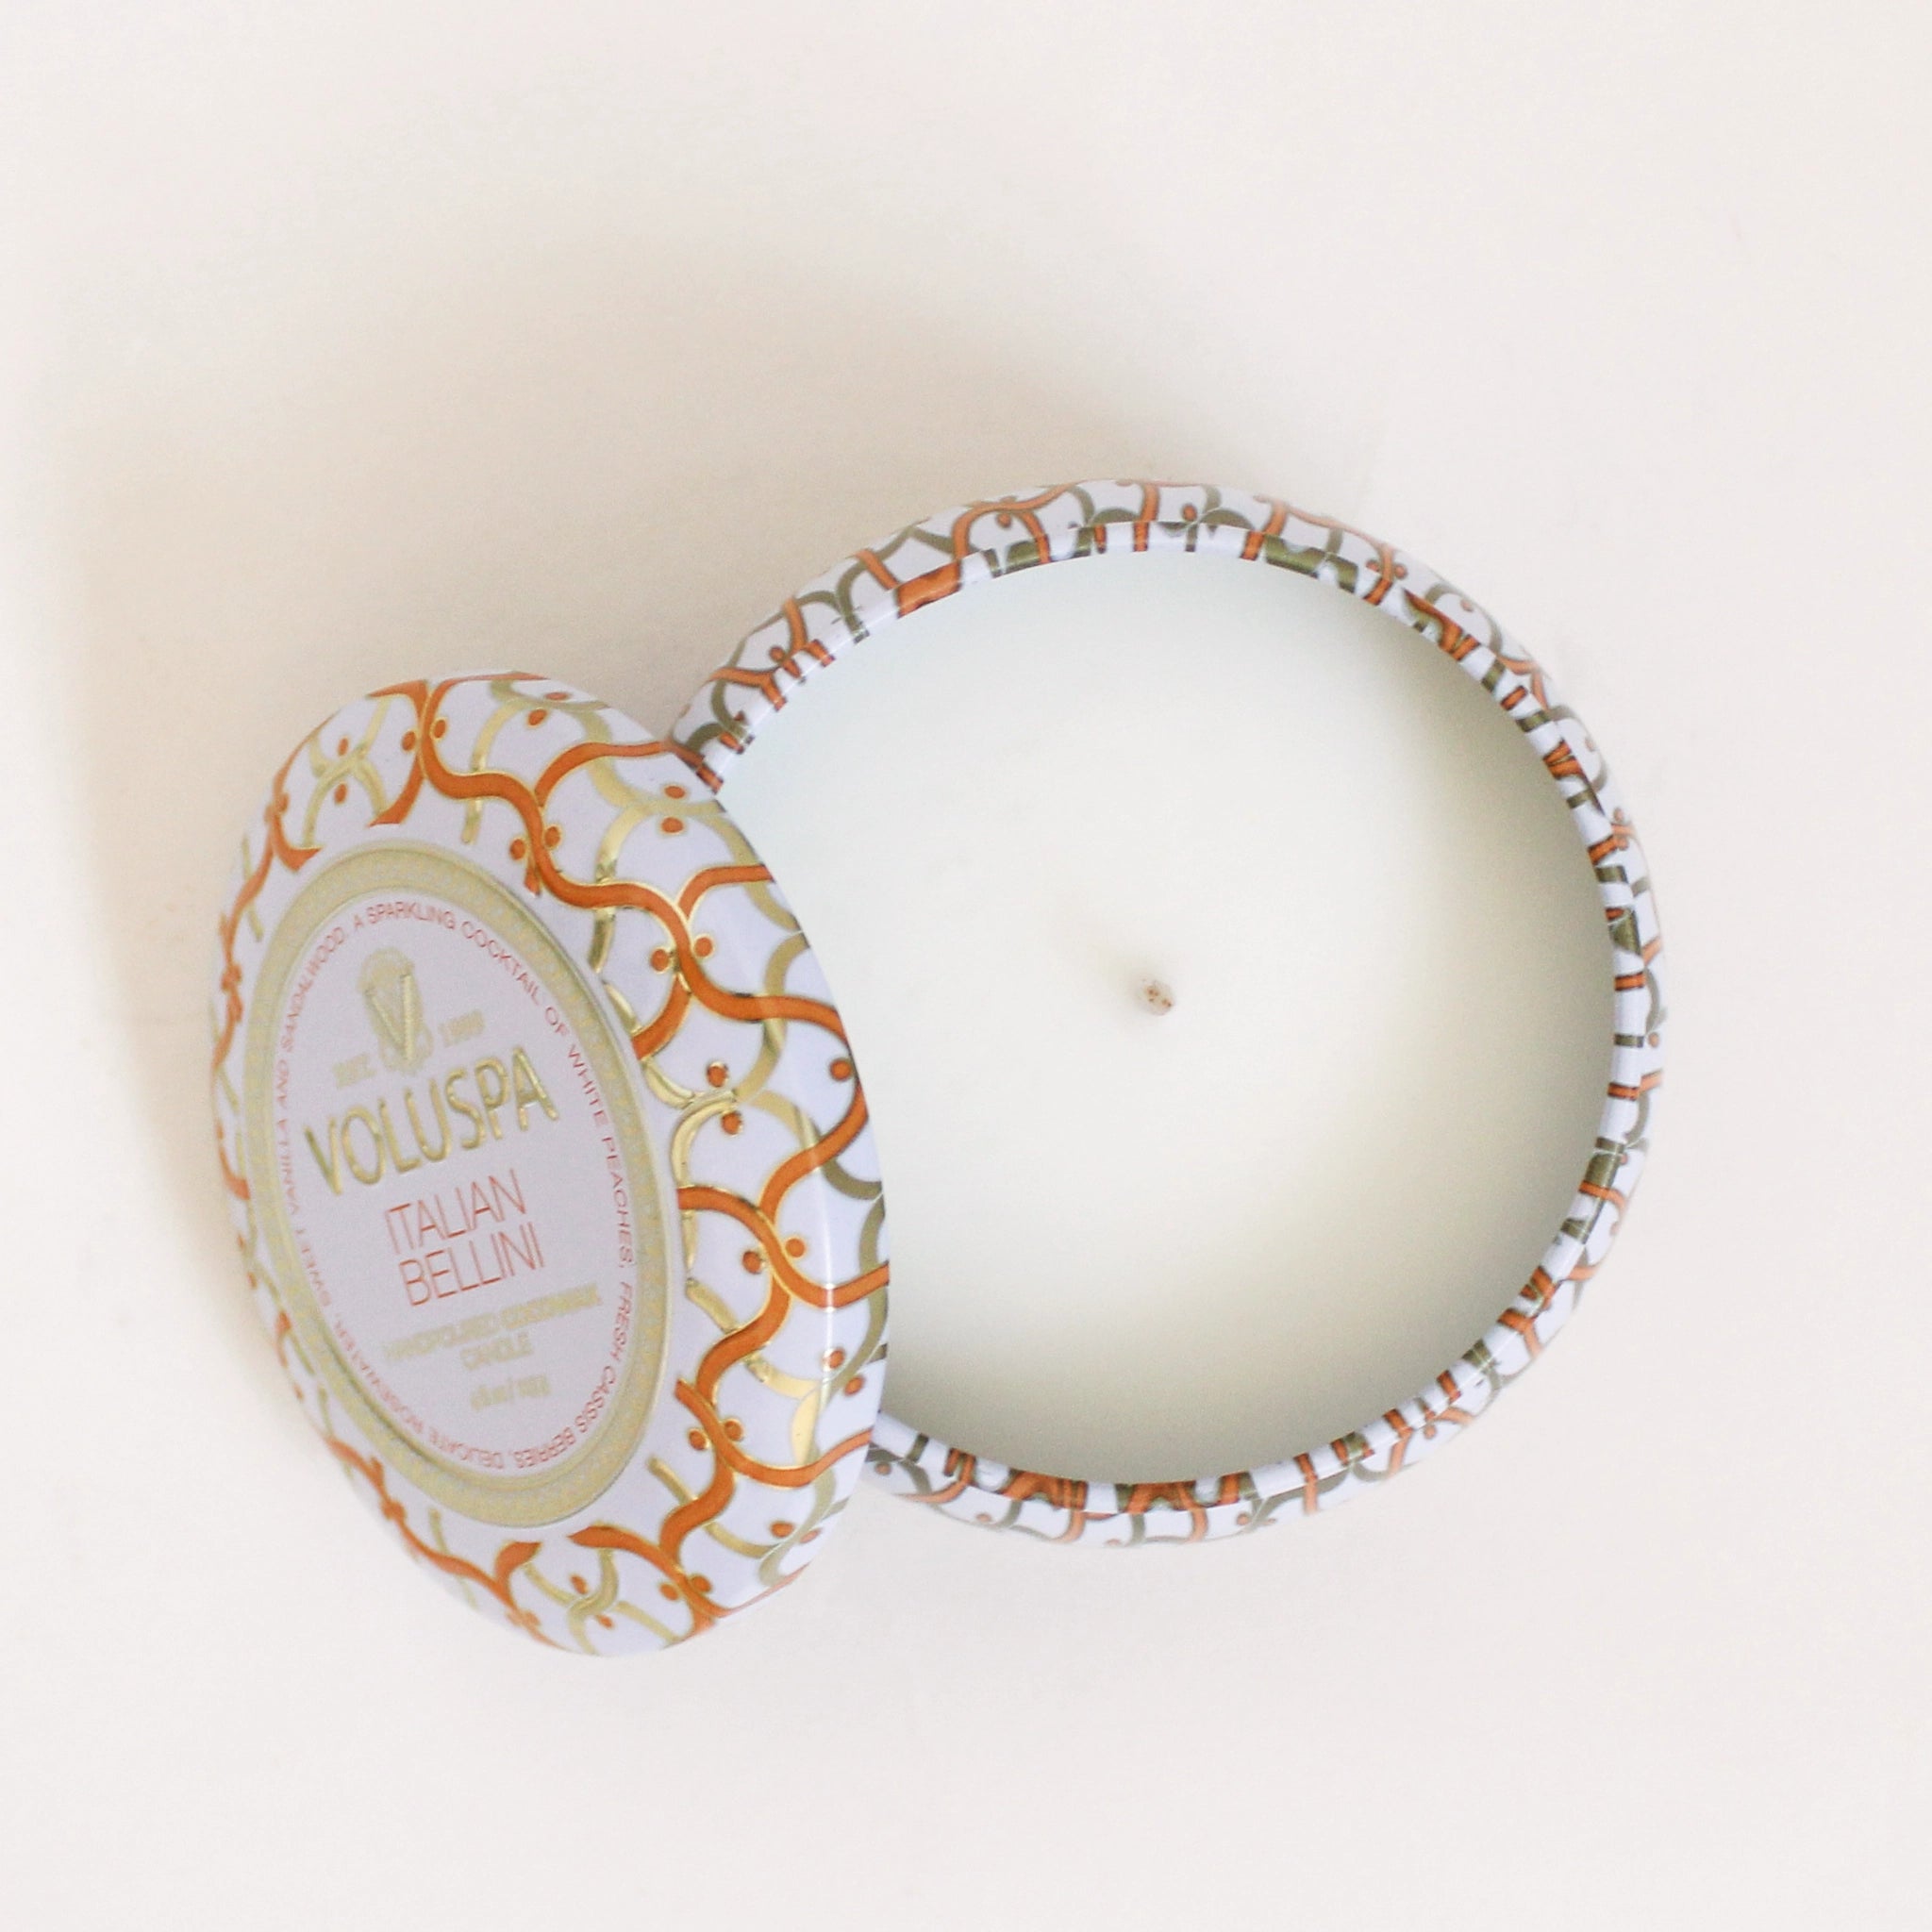 On a cream background is a orange and white tin that contains a single wick candle along with a circle label in the center of the lid that reads, "Voluspa Italian Bellini".